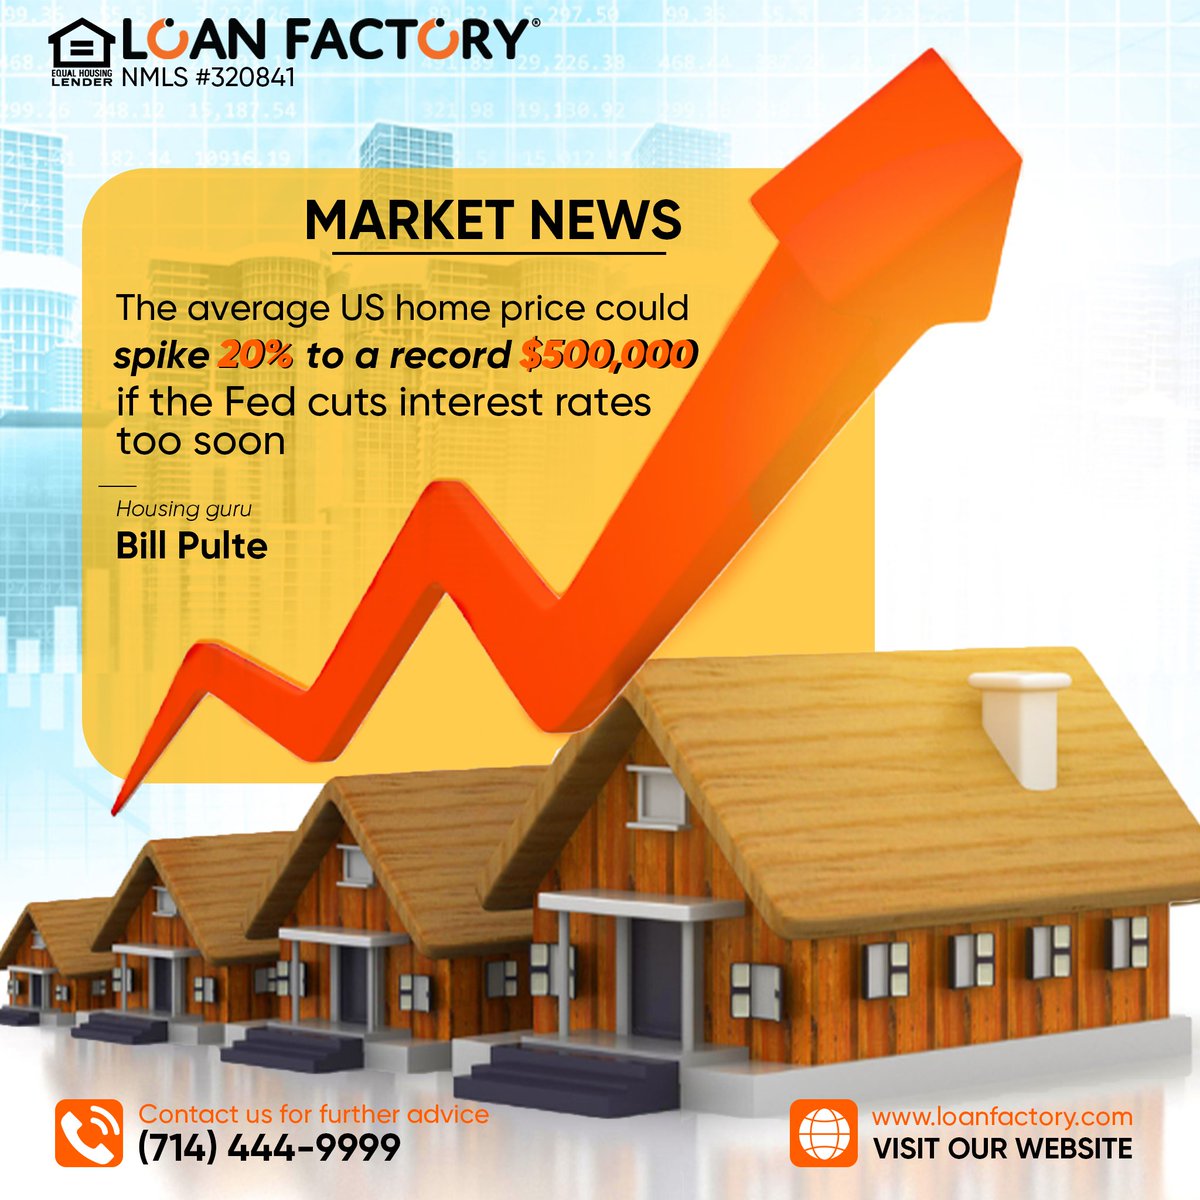 Get ready for a game-changing update on the housing market!

🏠 This isn't just news – it's a groundbreaking revelation that could reshape the future of housing as we know it!

#HousingMarket #Economy #FedCutRates #USRealEstate #LoanFactory
__________
🔐 CO-NMLS #320841